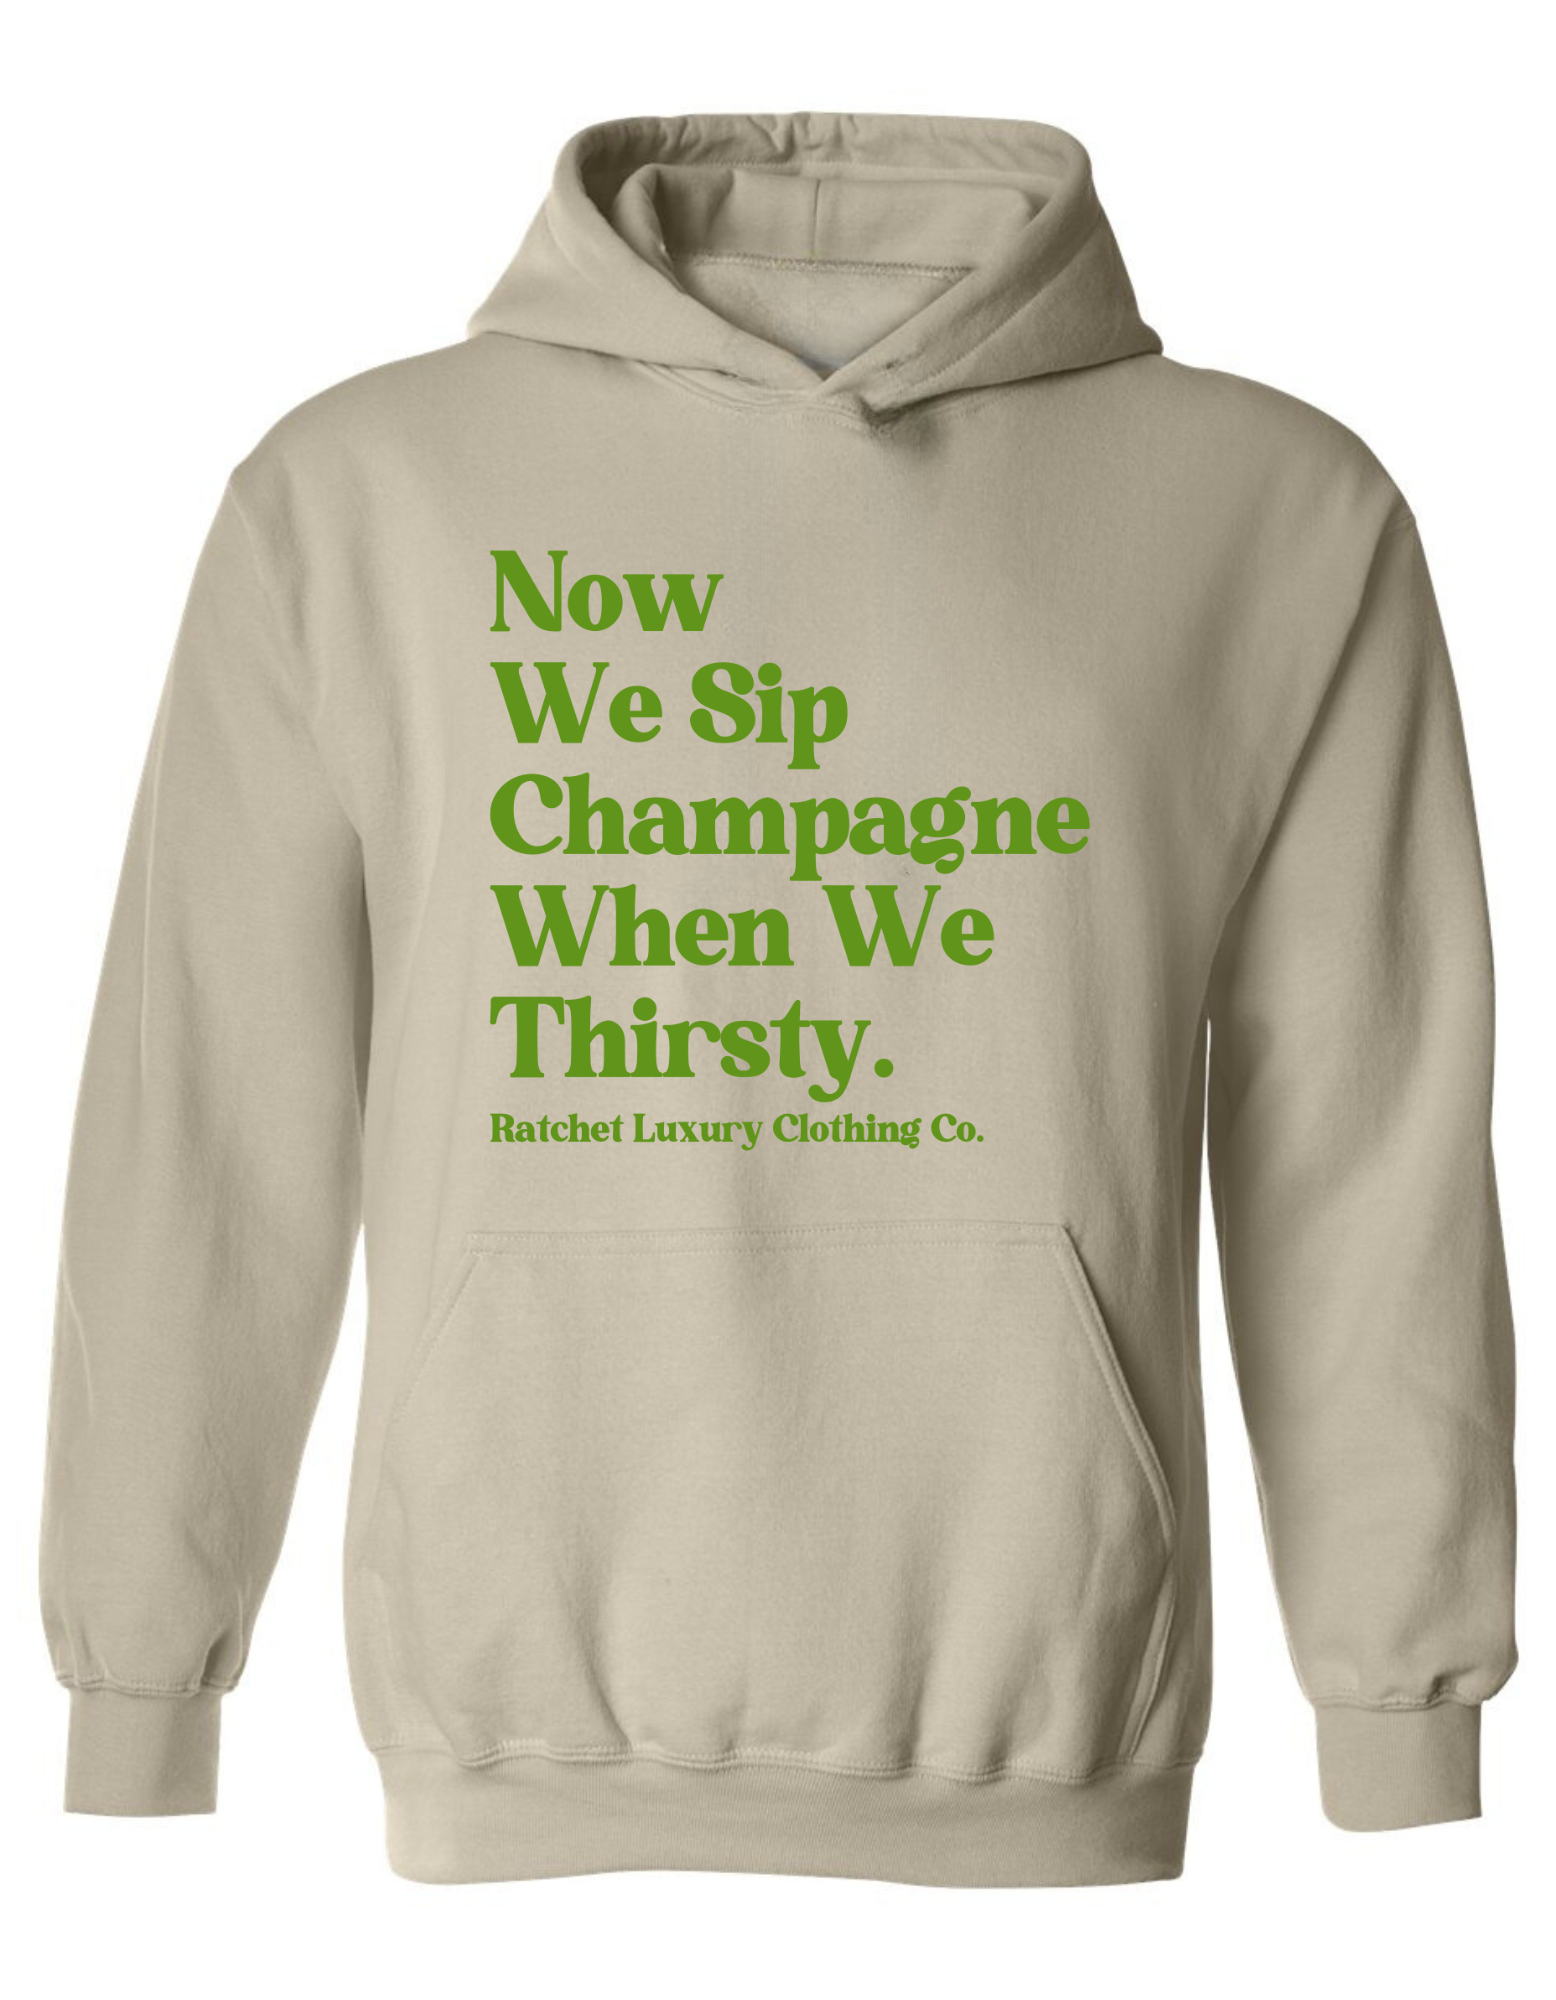 Stay Stylish With The 'Now We Sip Champagne When We Thirsty' Sweatshirt